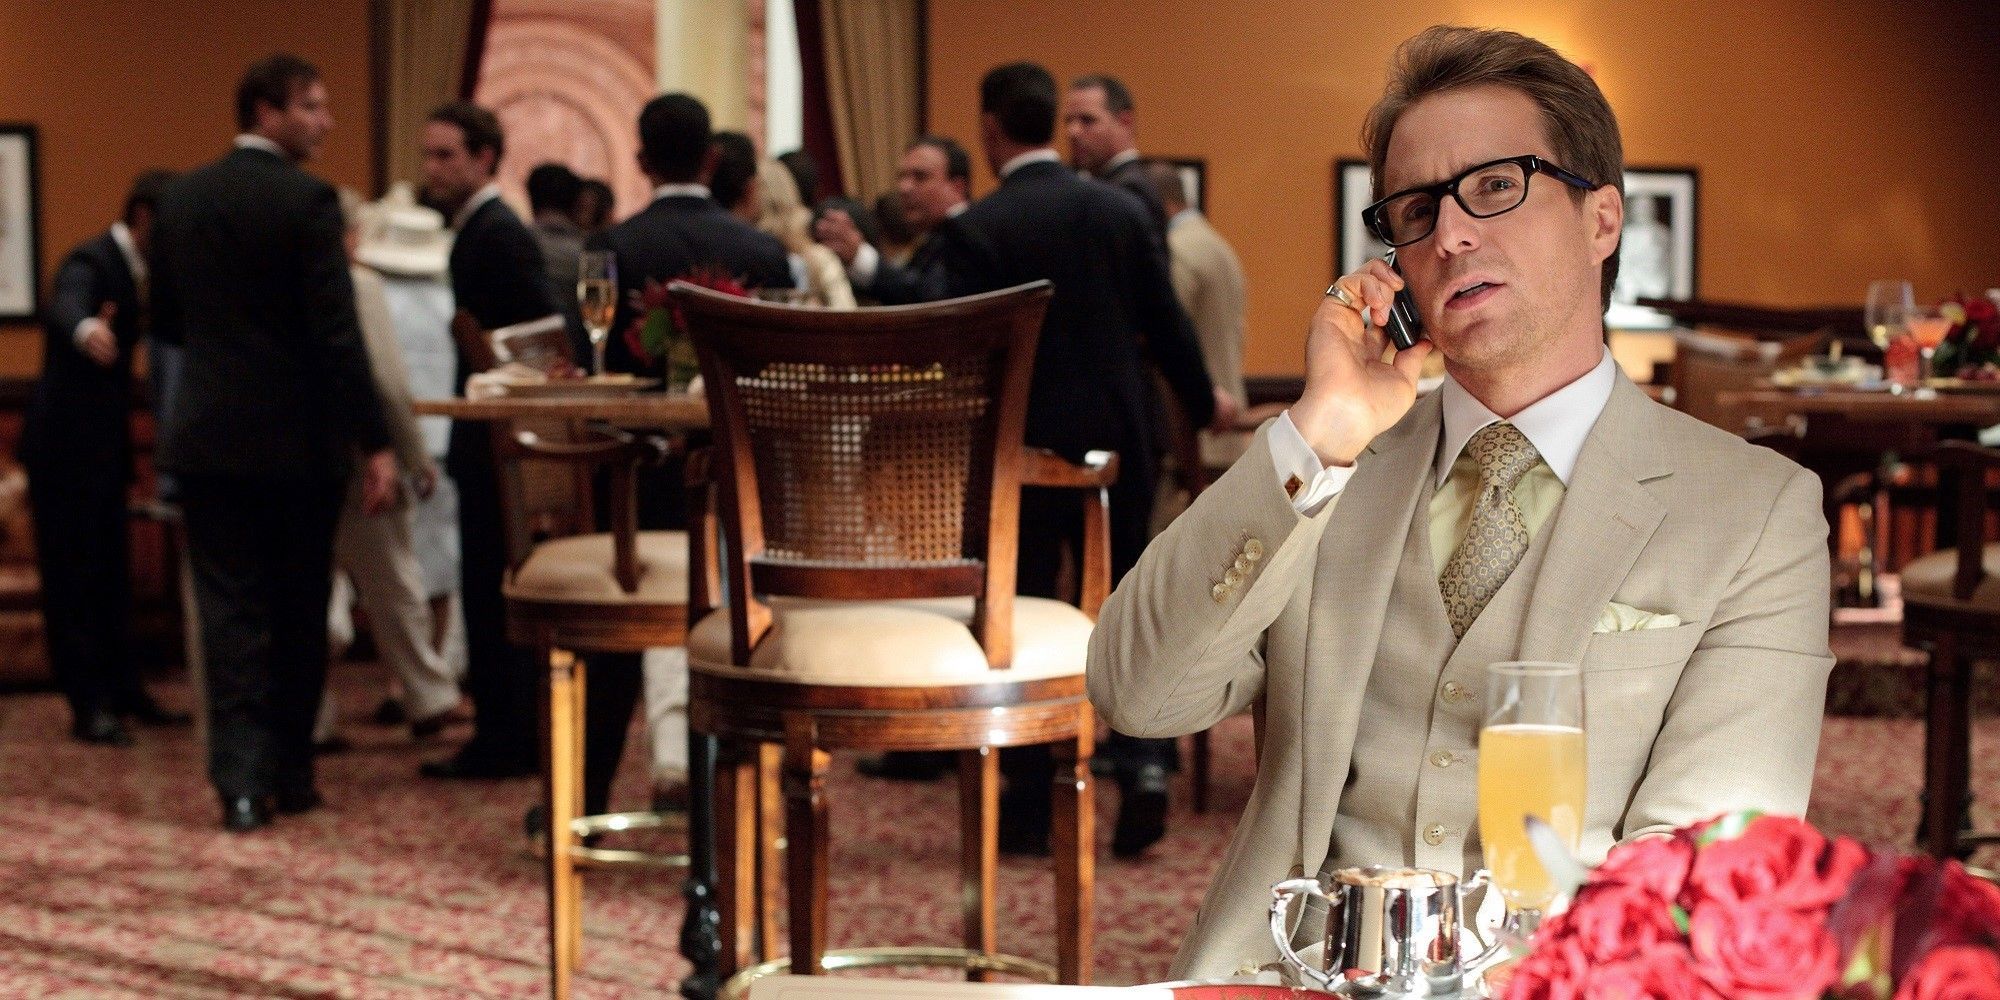 Sam Rockwell as Justin Hammer in Iron Man 2